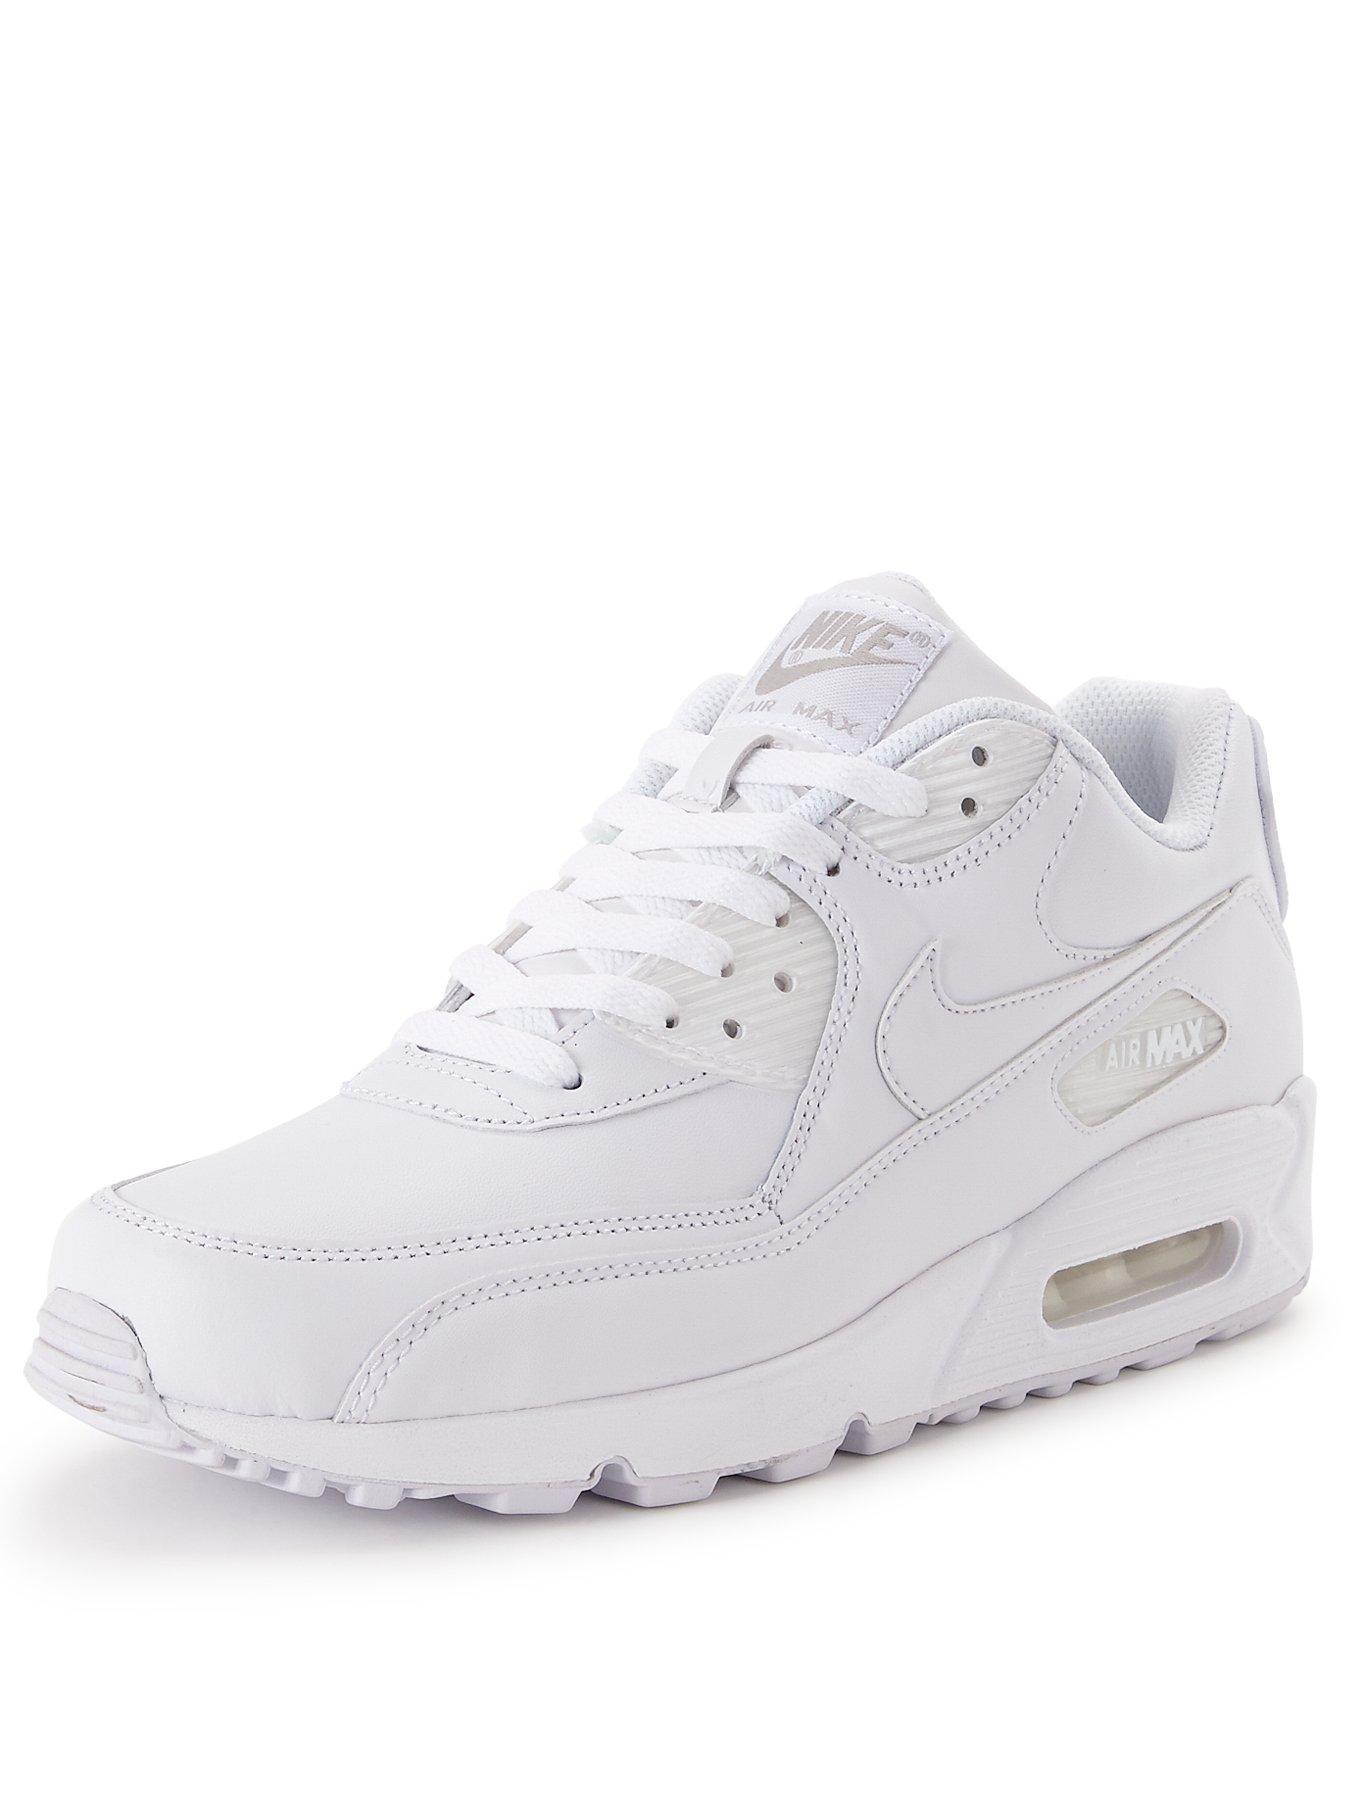 air max 90 all white leather mens